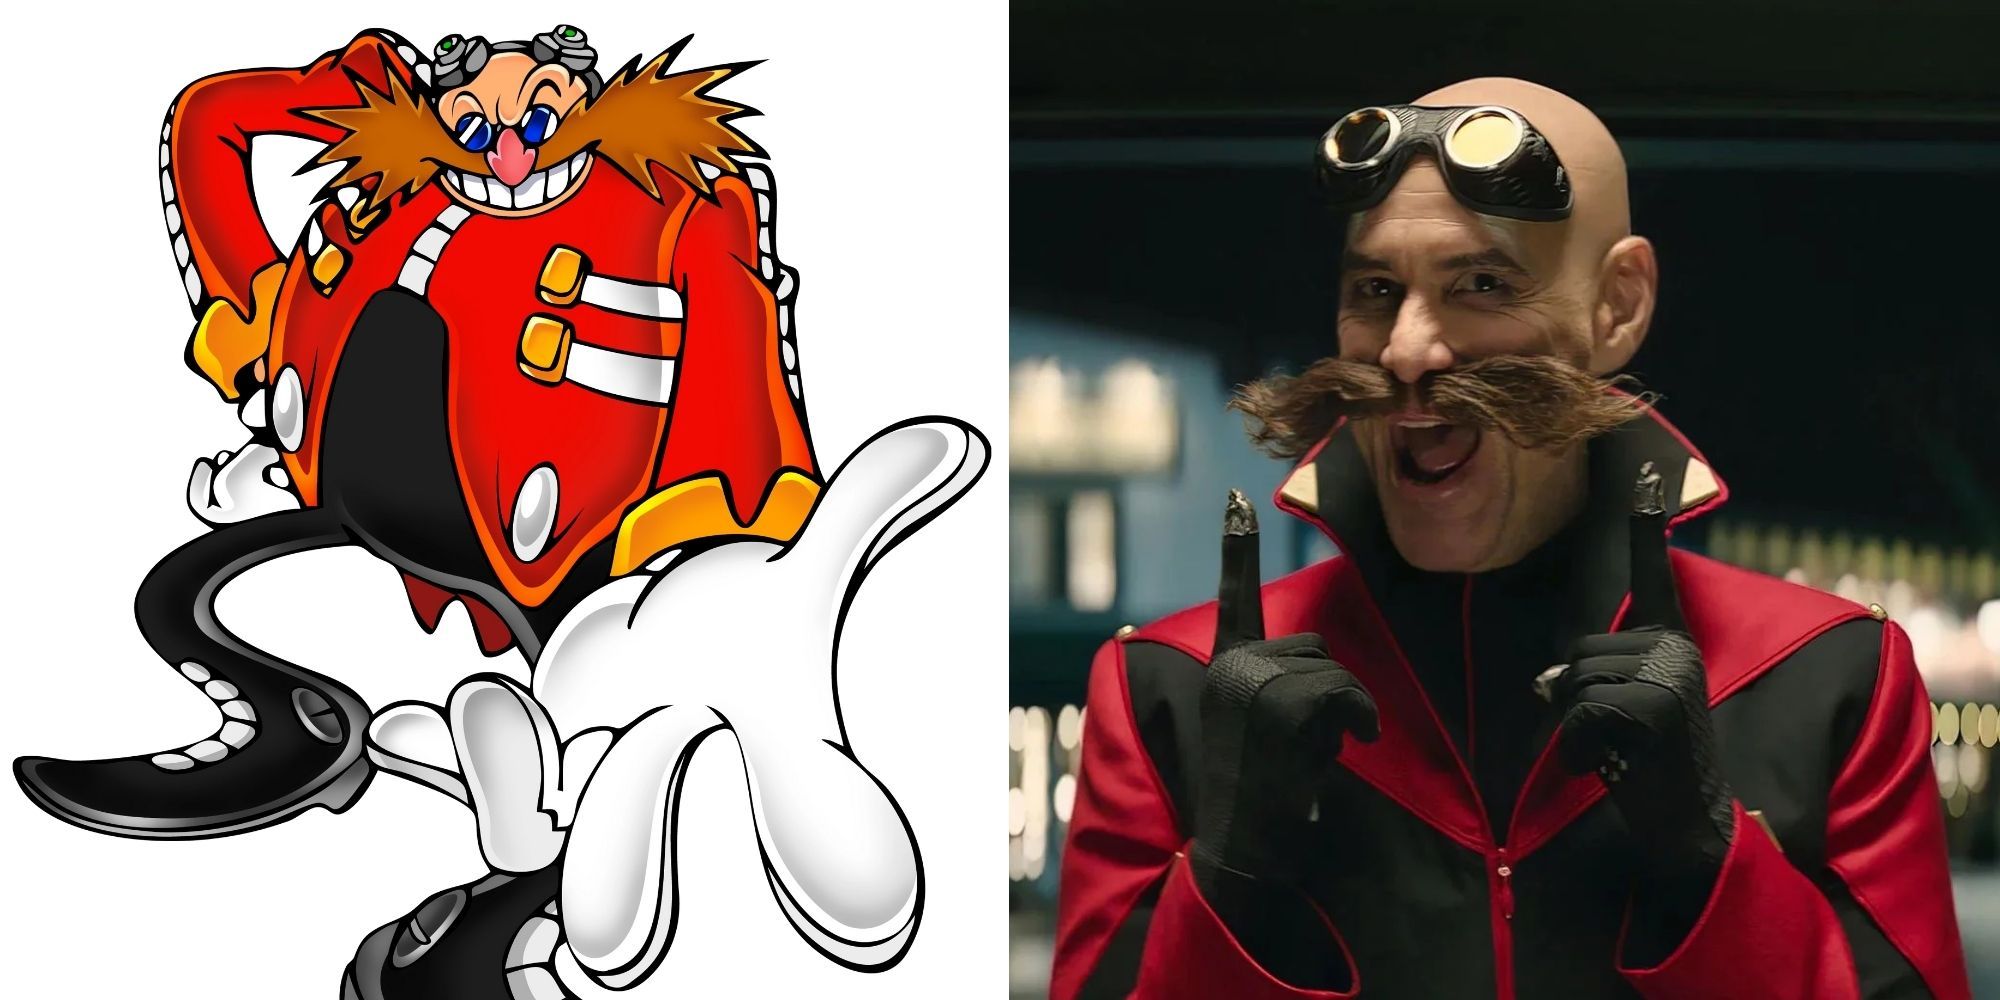 Eggman from Sonic Adventure and Jim Carrey as Dr Robotnik in the movie Sonic the Hedgehog 2